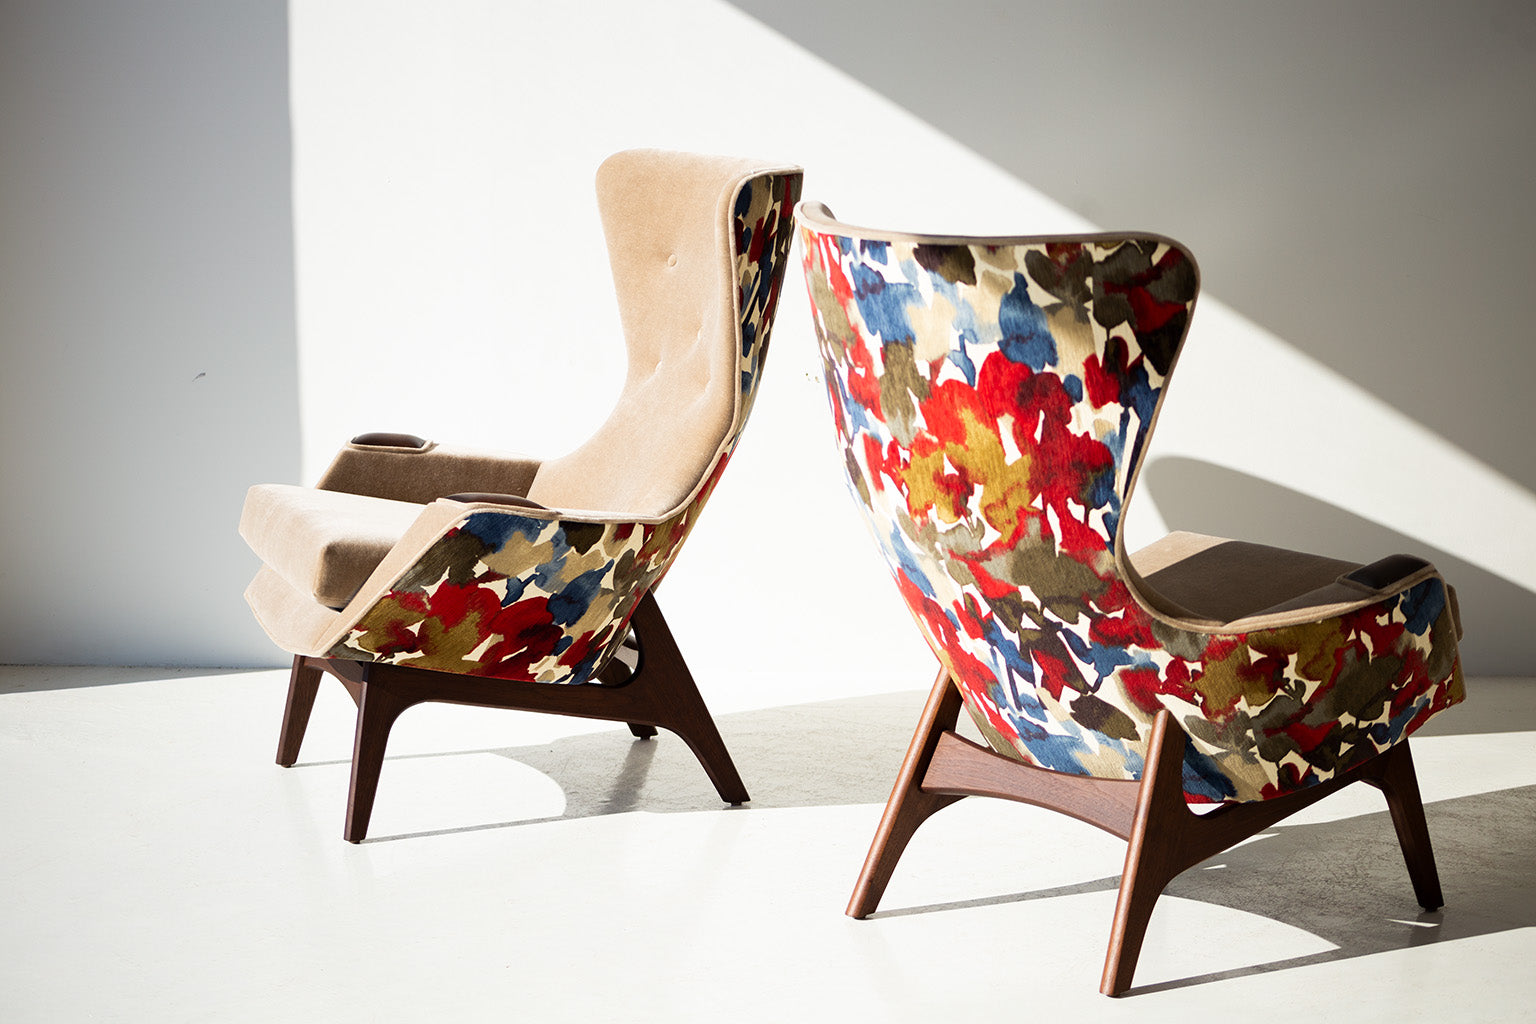 modern chairs for Craft